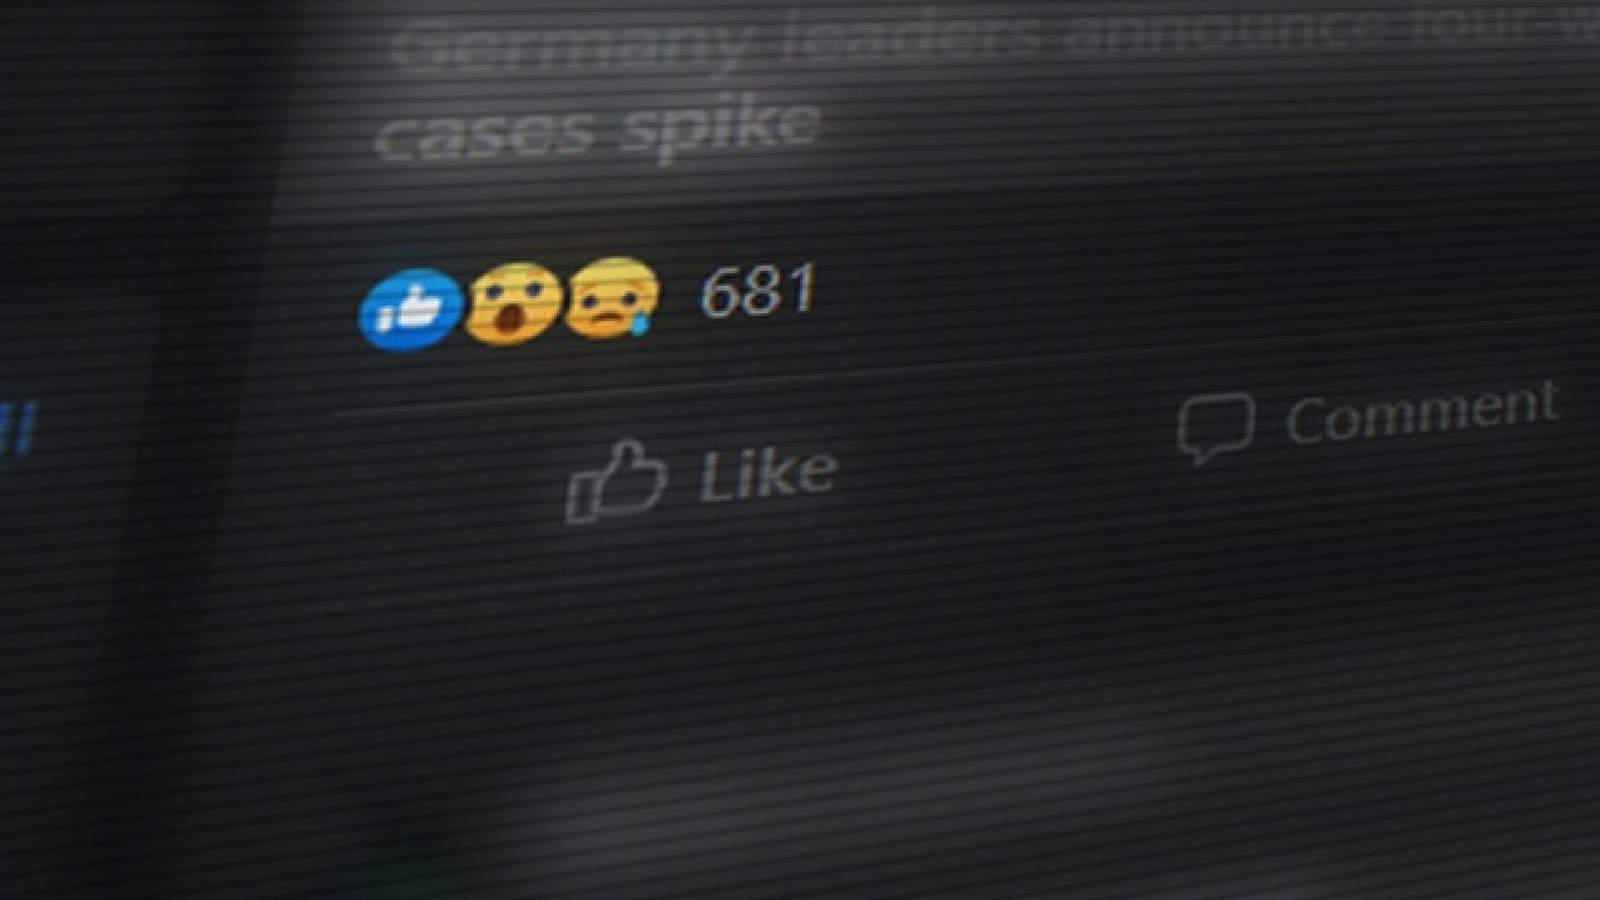 How your Facebook ‘likes’ could make you a target for scams